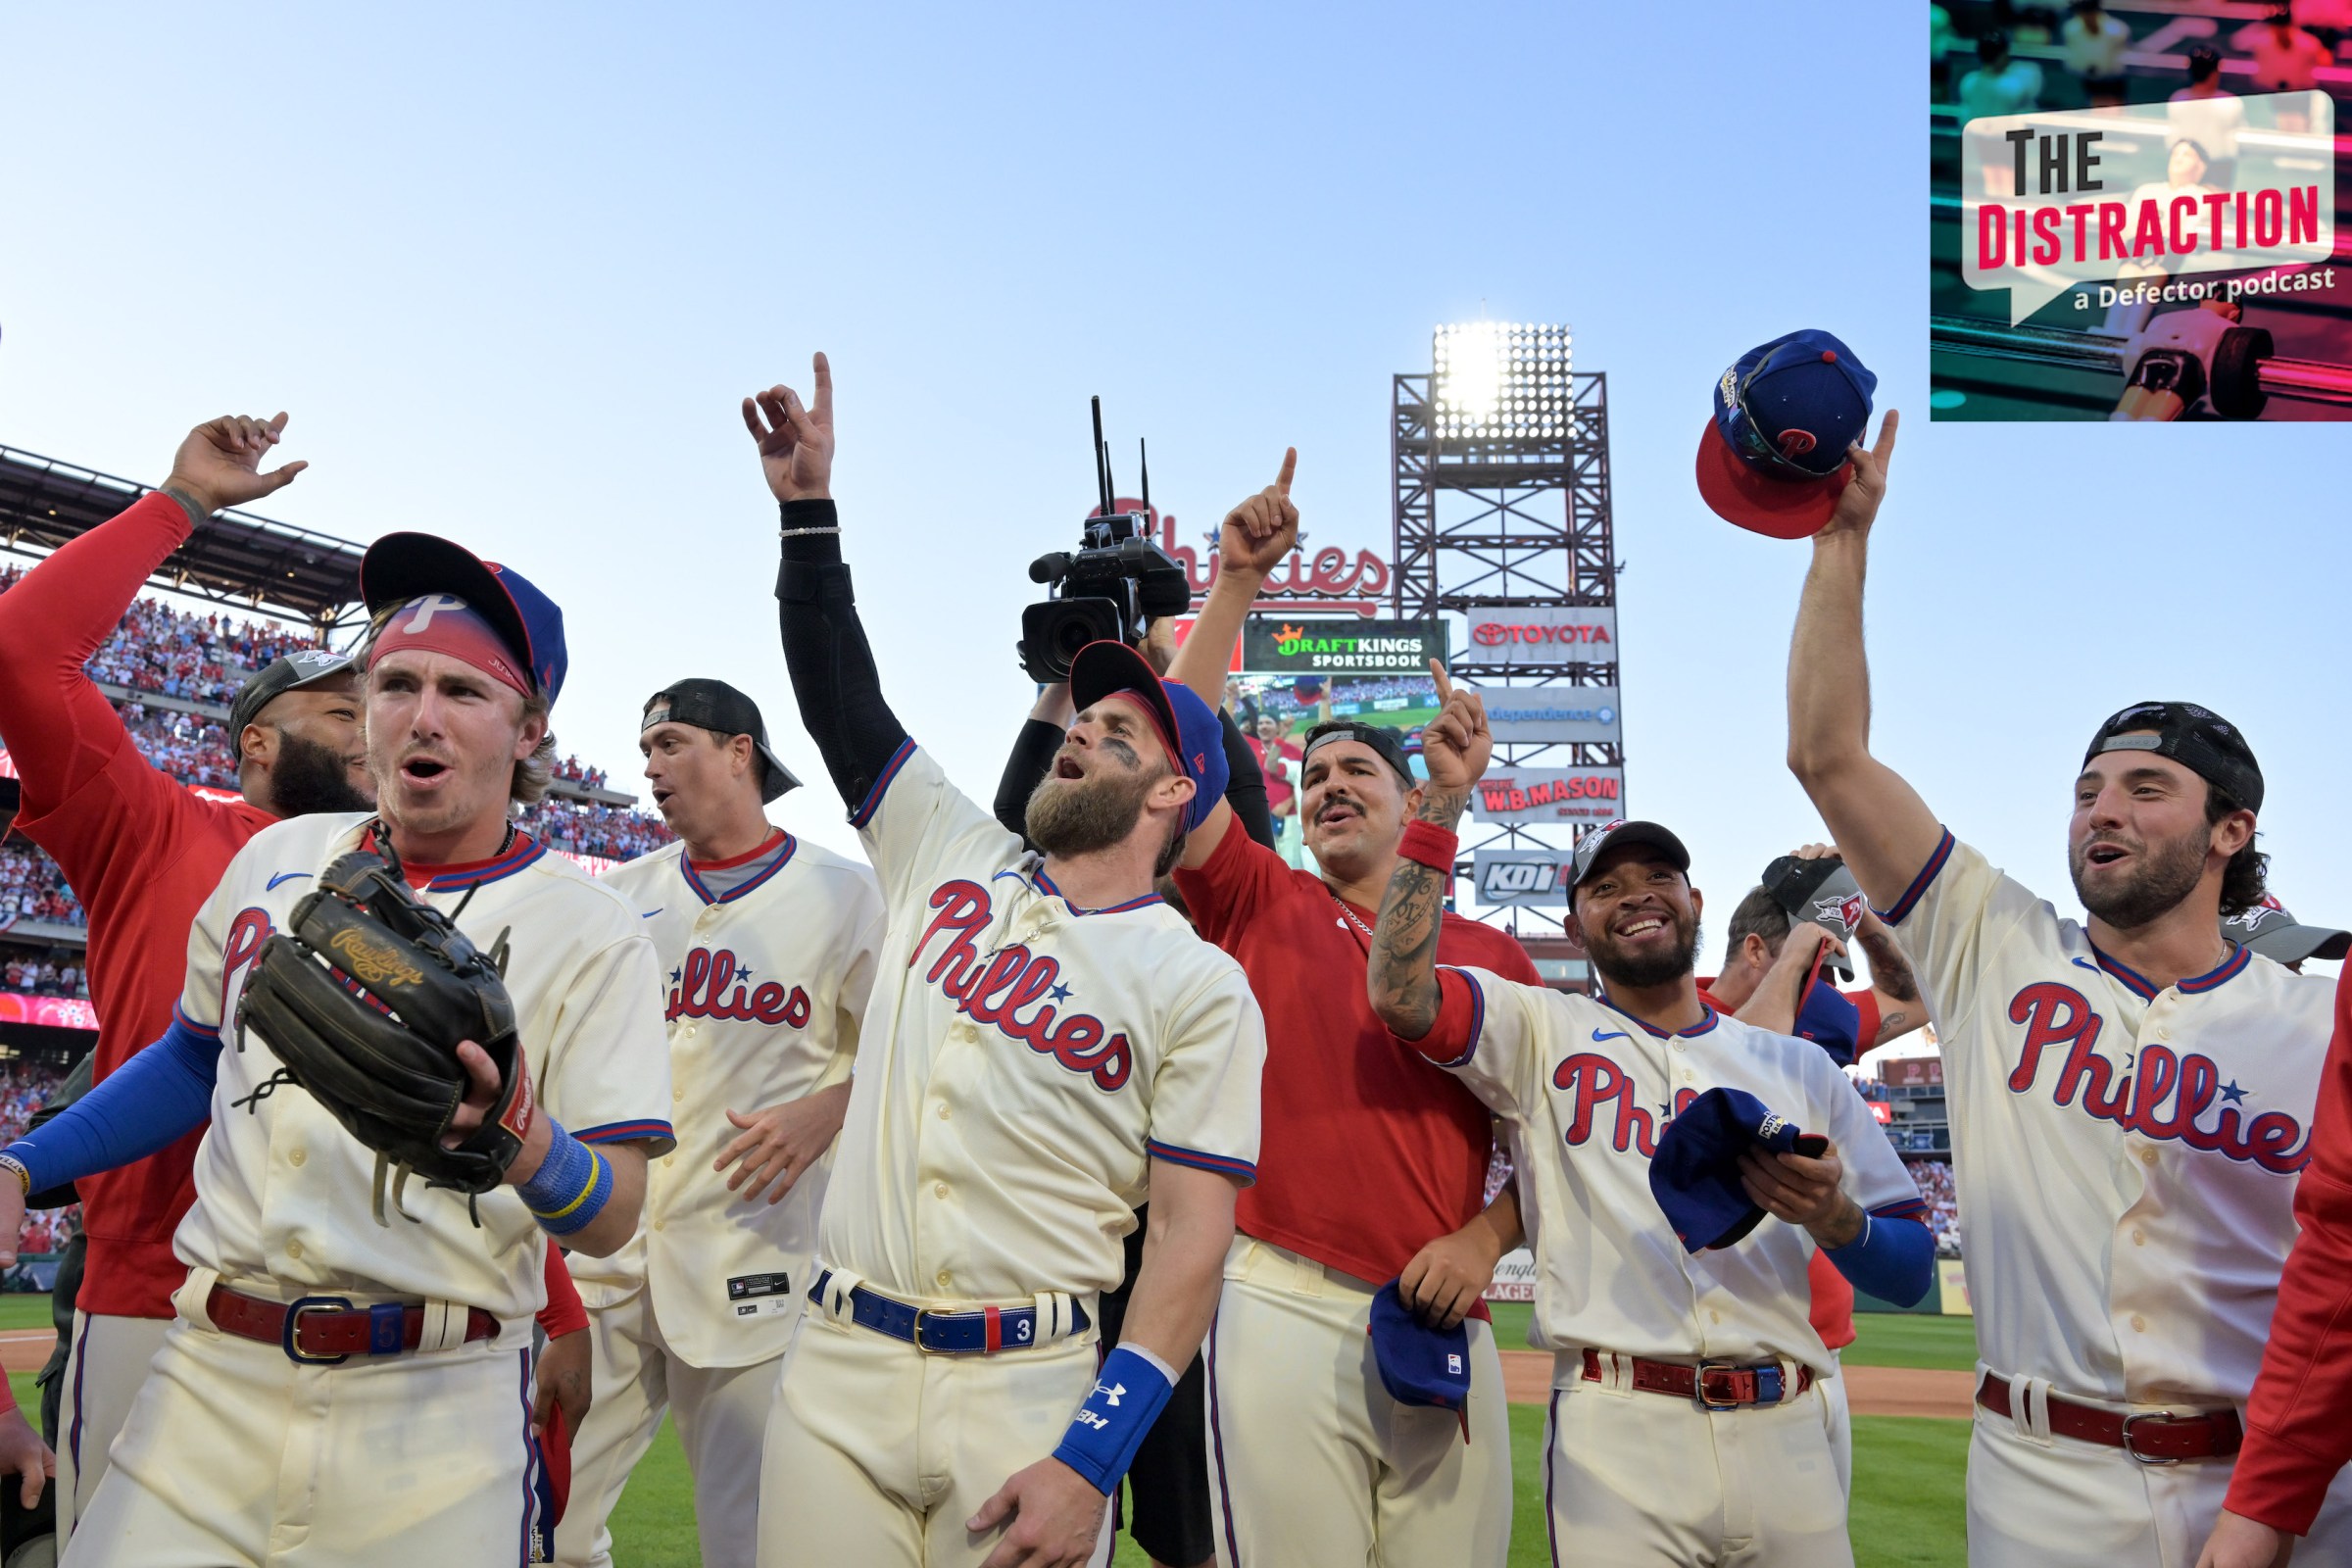 The Philadelphia Phillies celebrate after dispatching the Atlanta Braves in the NLDS.